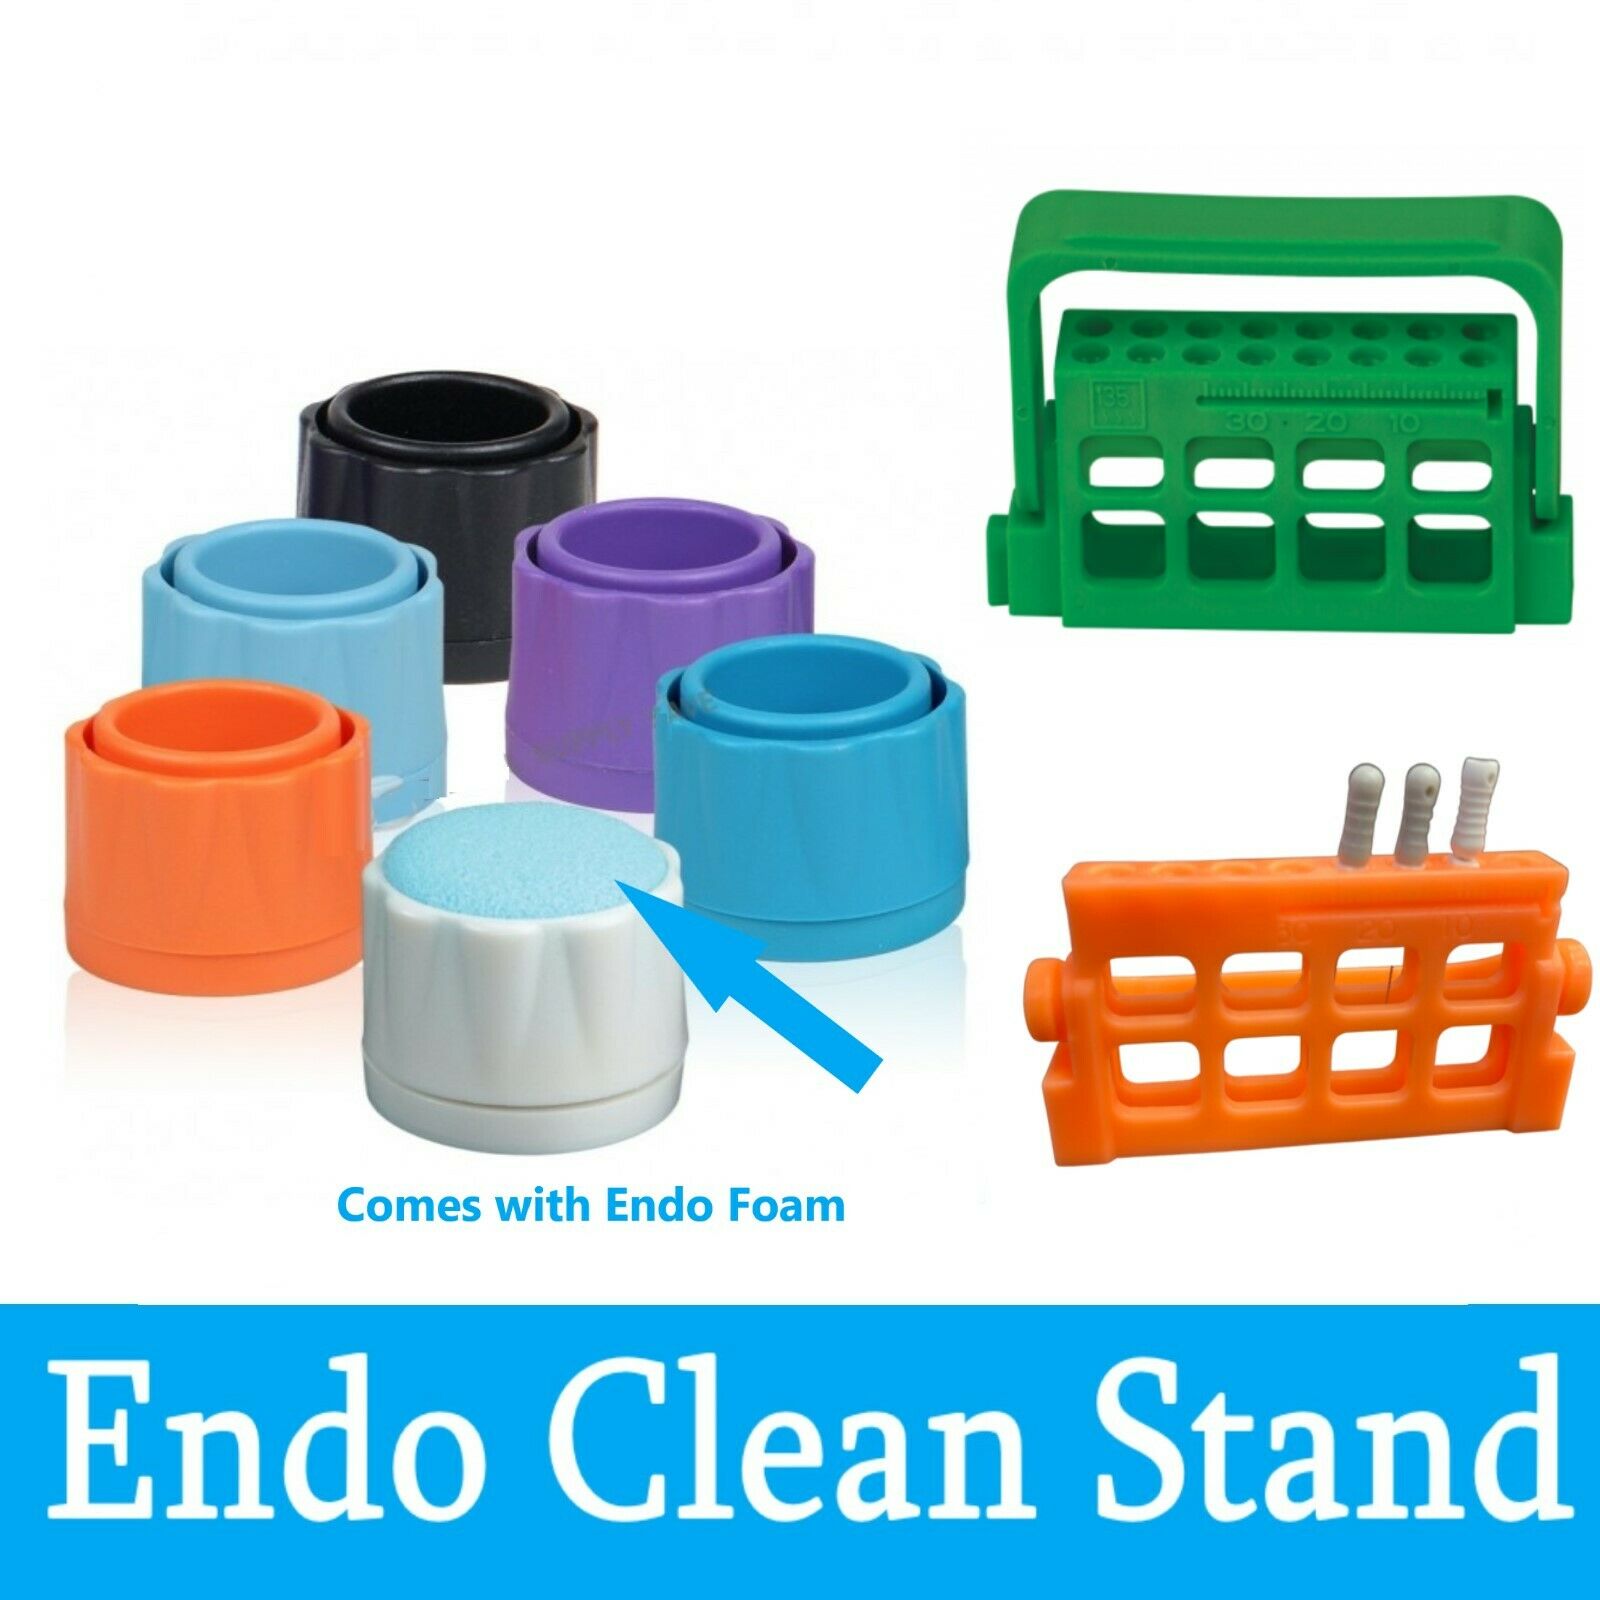 Dental Round Endo Clean Stand Cleaning Foam Endo File Holder 8 Holes or 16 Holes